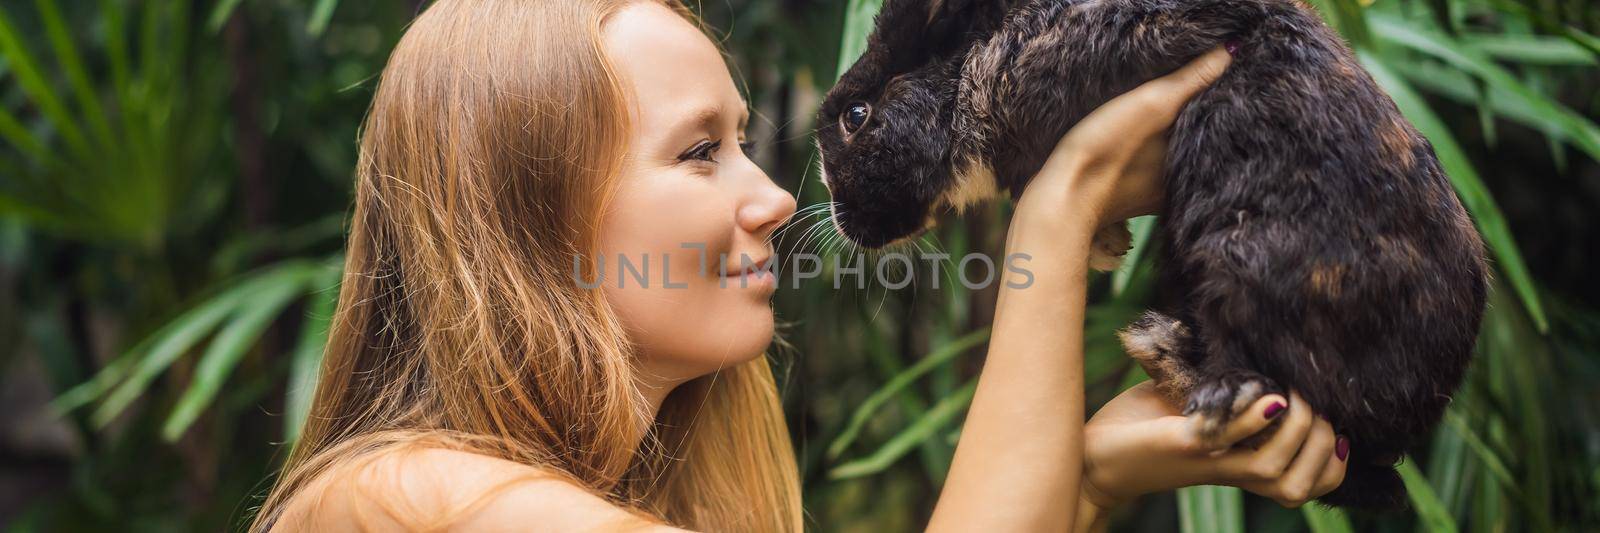 Woman holding a rabbit. Cosmetics test on rabbit animal. Cruelty free and stop animal abuse concept BANNER, LONG FORMAT by galitskaya